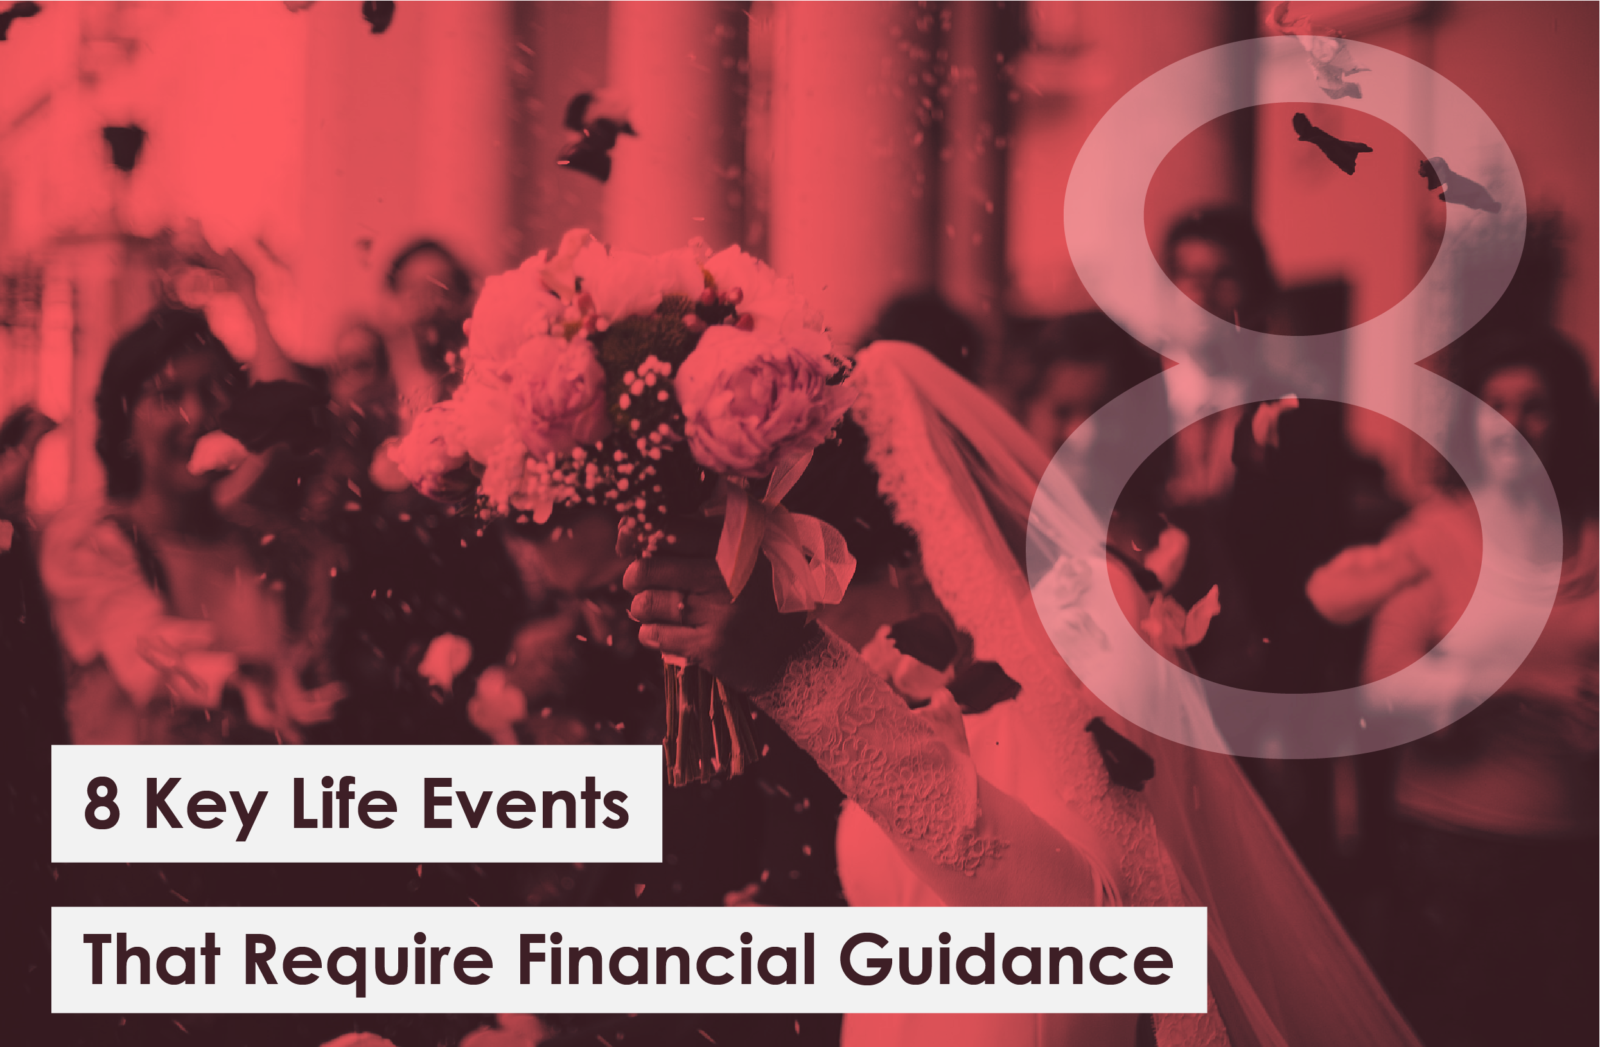 8 Key Life Events that Require Financial Guidance